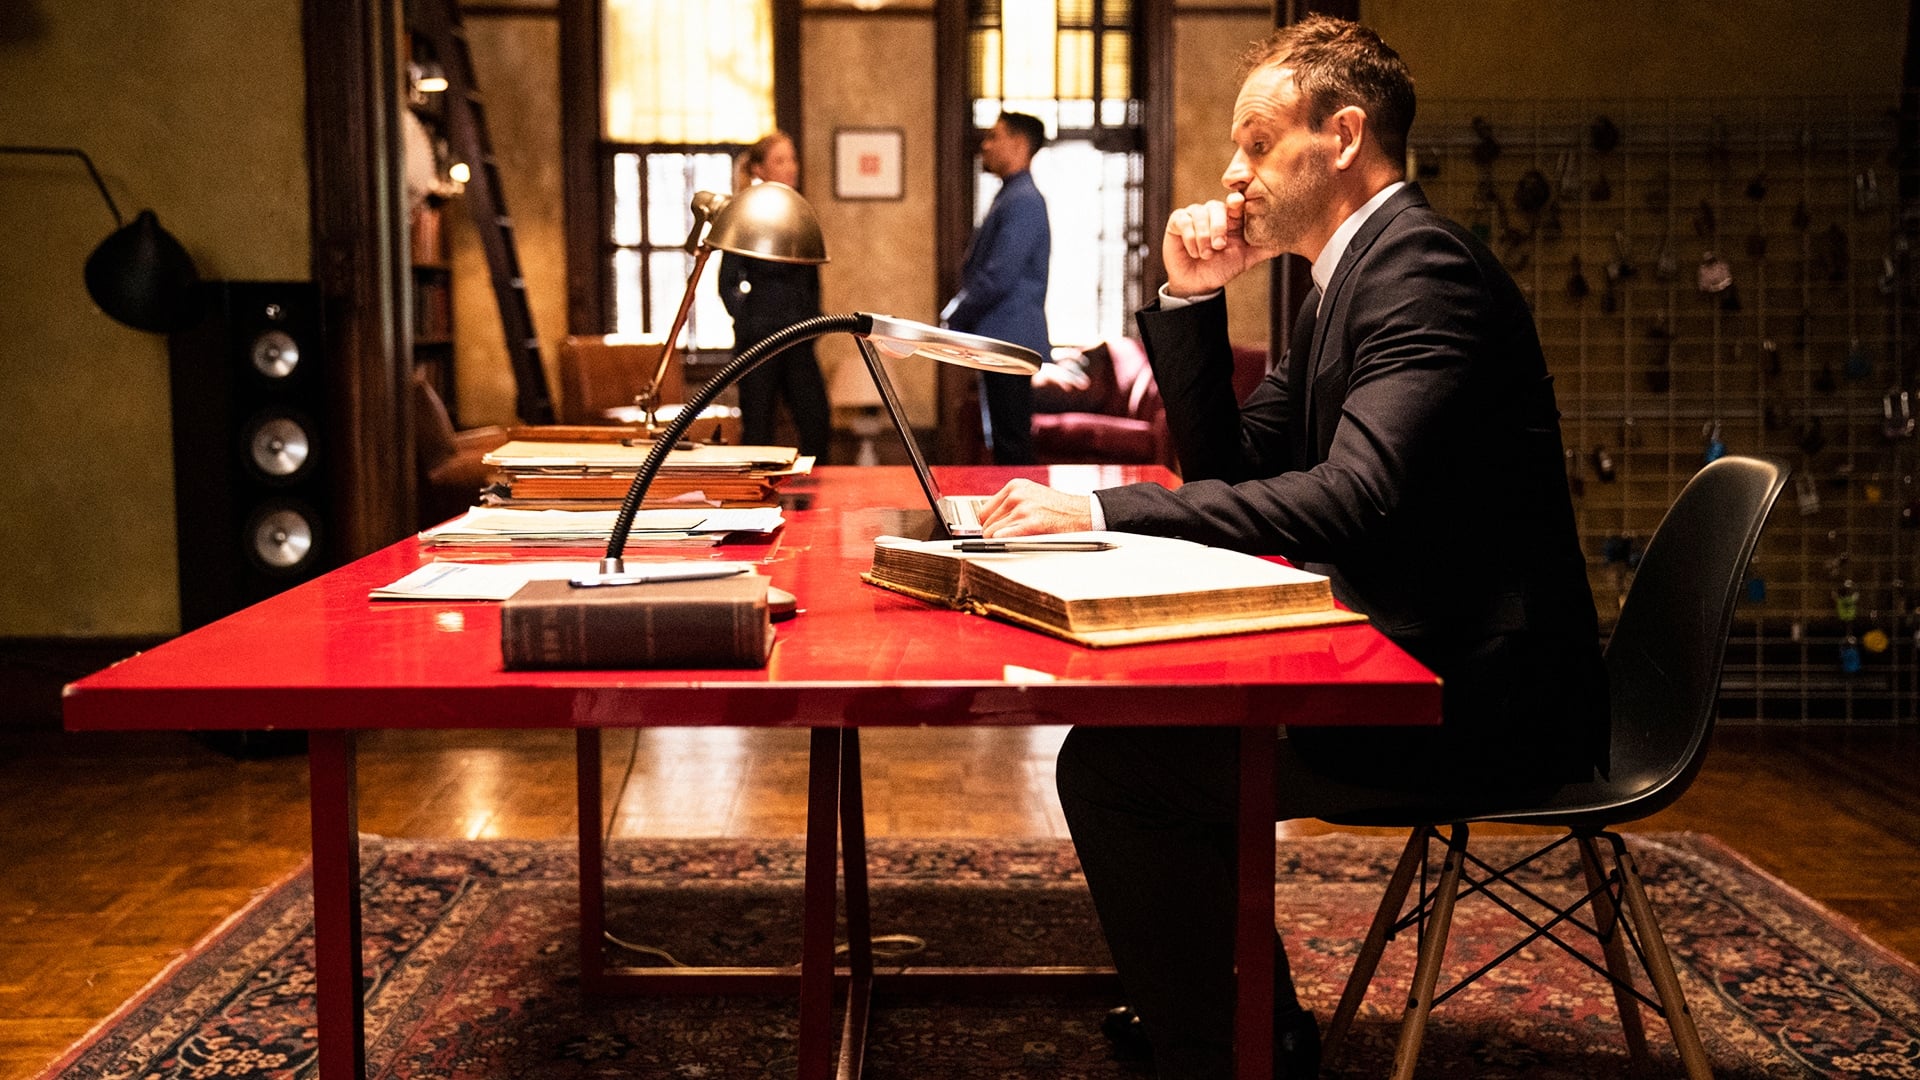 Elementary Season 7 :Episode 3  The Price of Admission